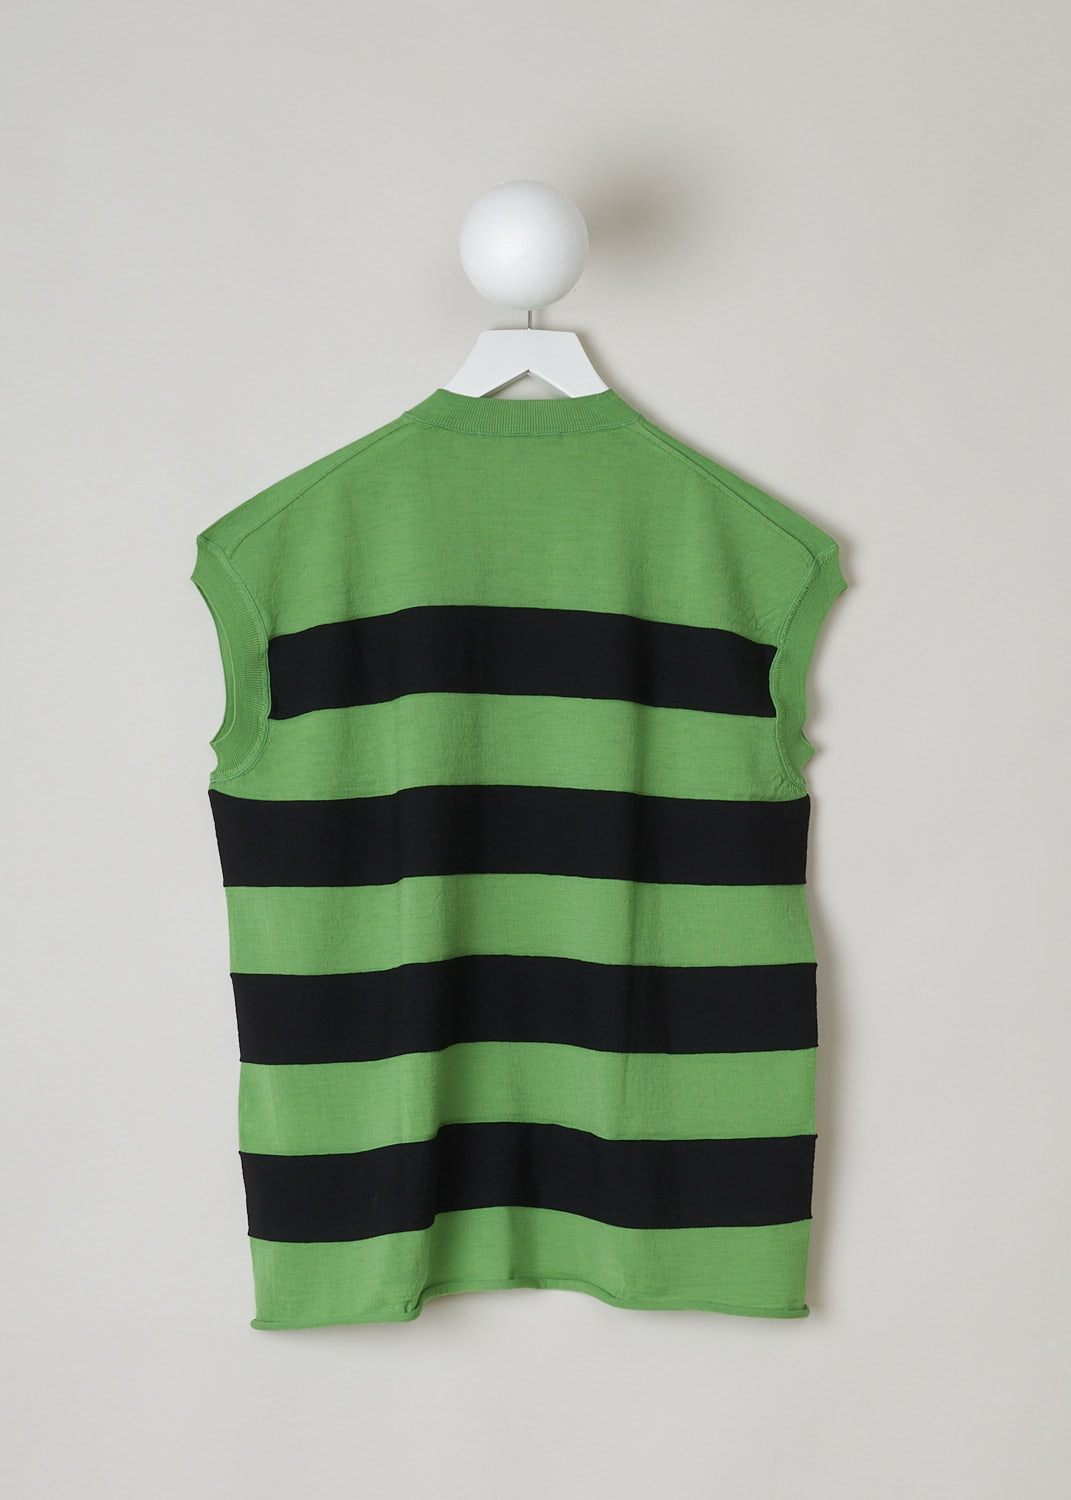 SOFIE Dâ€™HOORE, GREEN AND BLACK STRIPED VEST, MODA_YFIMBI_GREEN_BLACK, Green, Black, Back, This green and black striped wool vest has a ribbed V-neckline. That same ribbed finish can be found around the armholes. The vest has a rolled hemline. The vest has a wider silhouette. 
